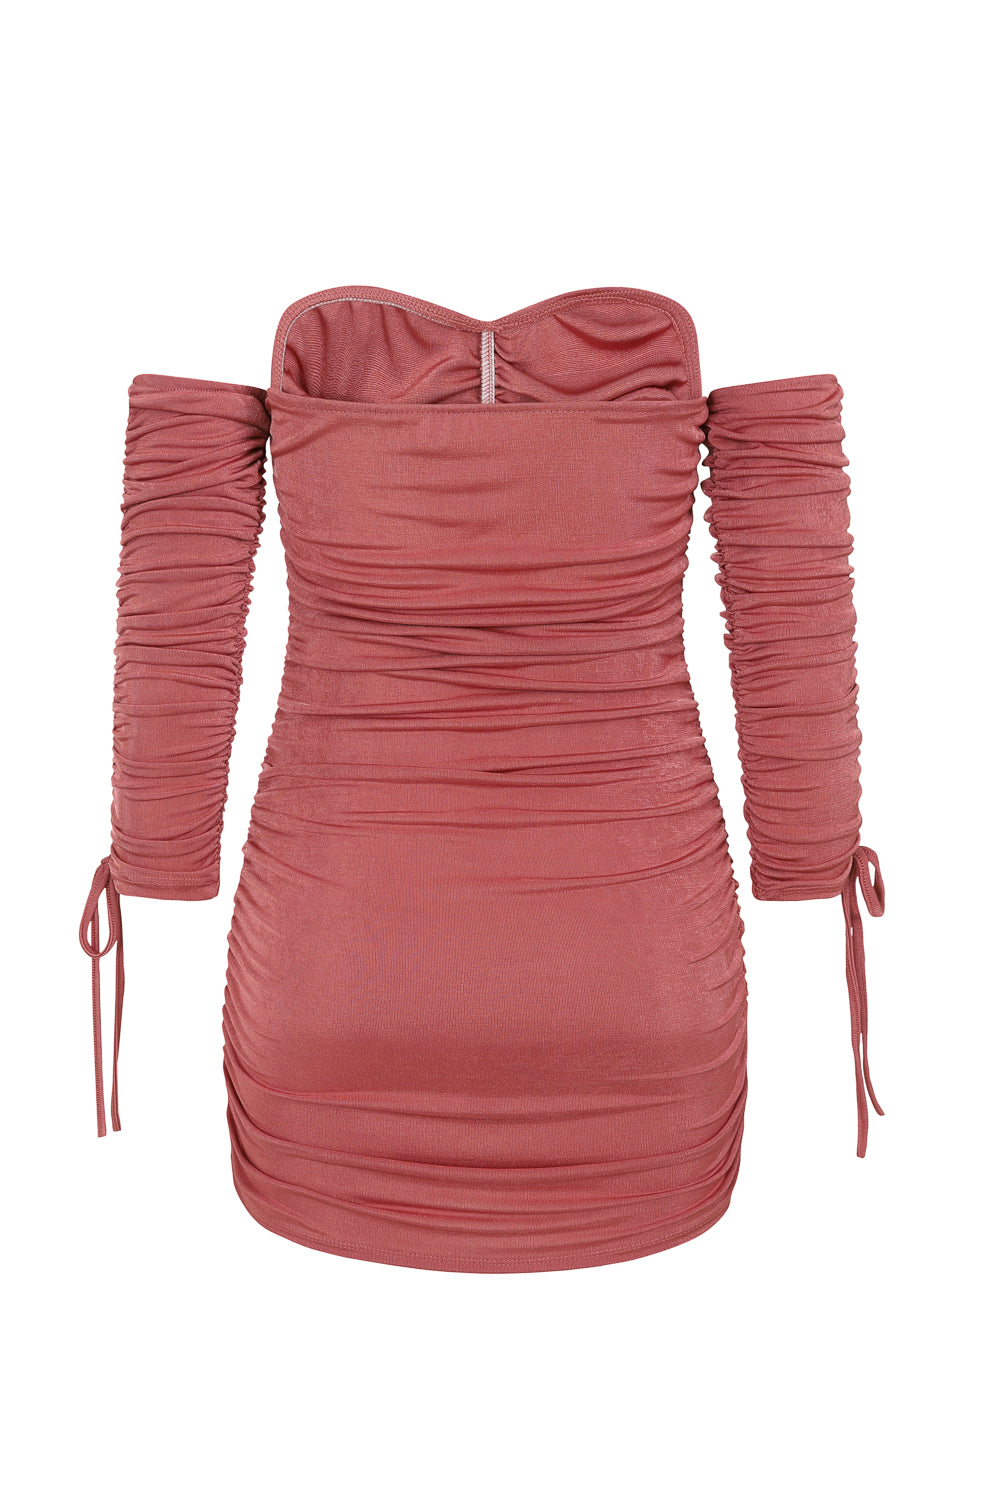 All Ruched Up Dusty Pink Off The Shoulder Long Sleeve Slinky Mini Dress